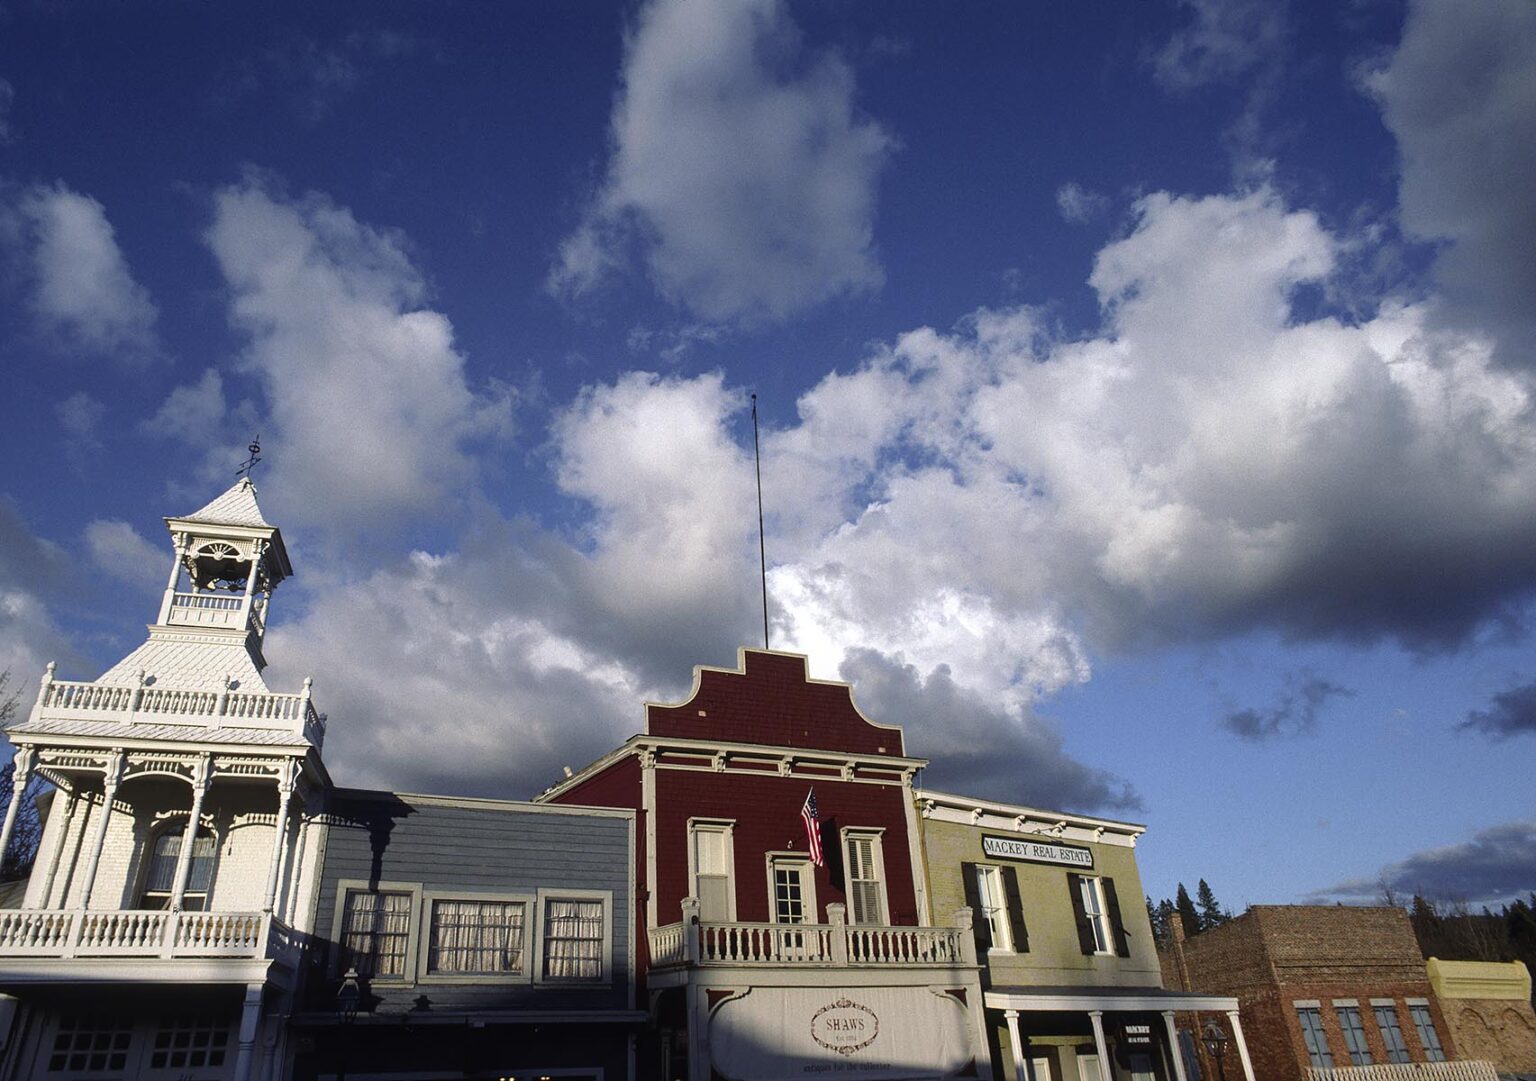 Historical NEVADA CITY was once a mining town in California's GOLD RUSH days